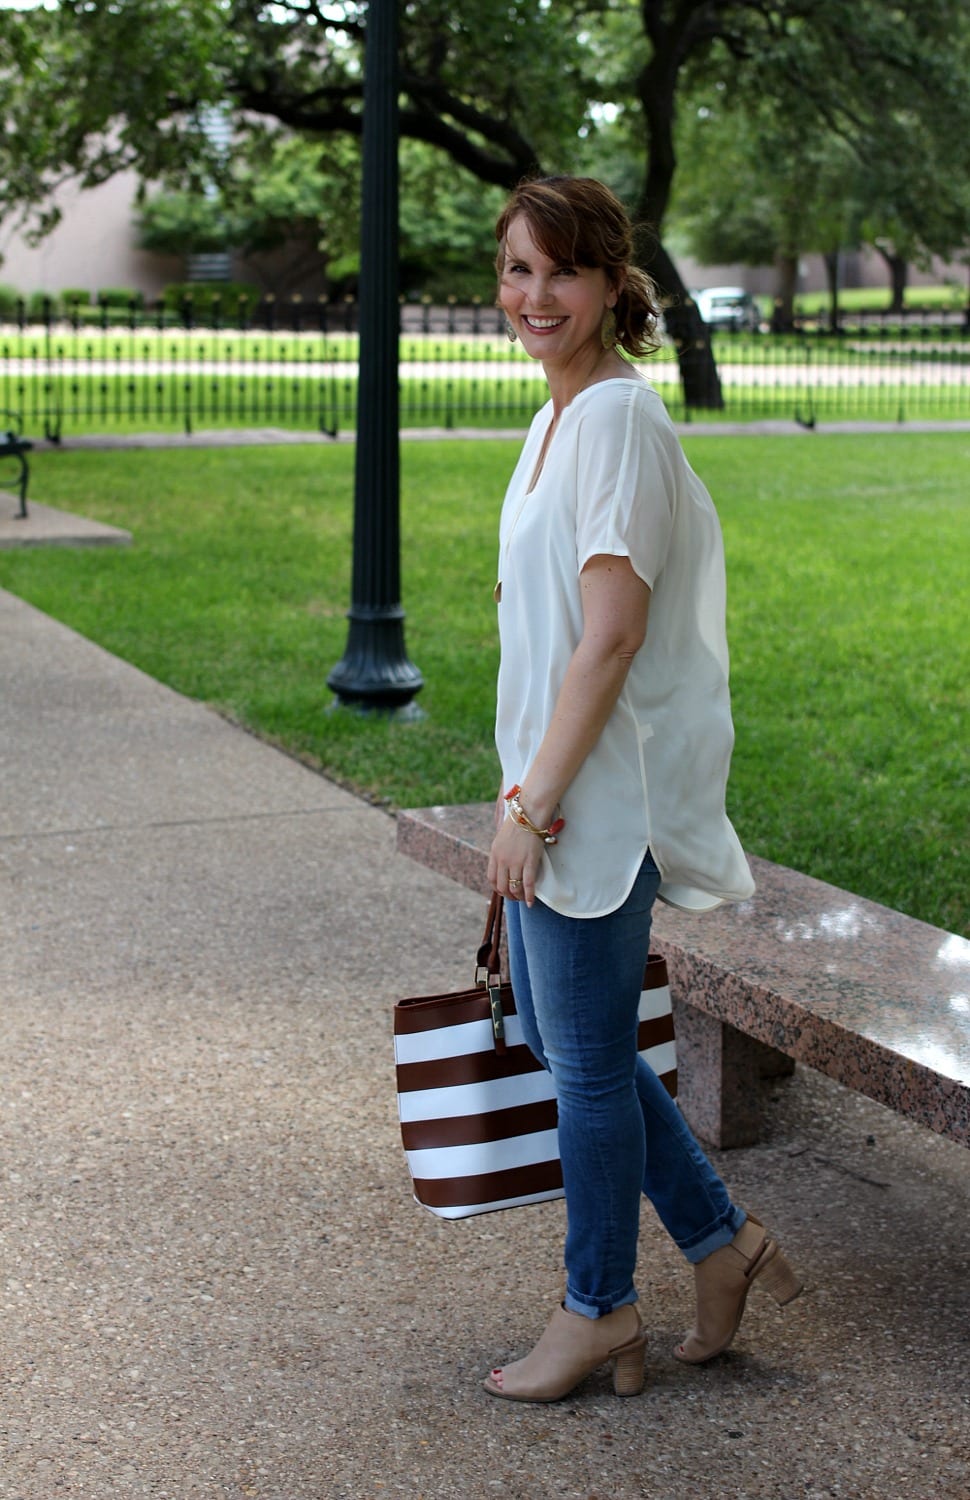 I love tunic tops and they make putting together an outfit I feel good in so easy. This classic tunic from J. Jill is paired with light denim, nude peep toe booties and a striped tote bag.